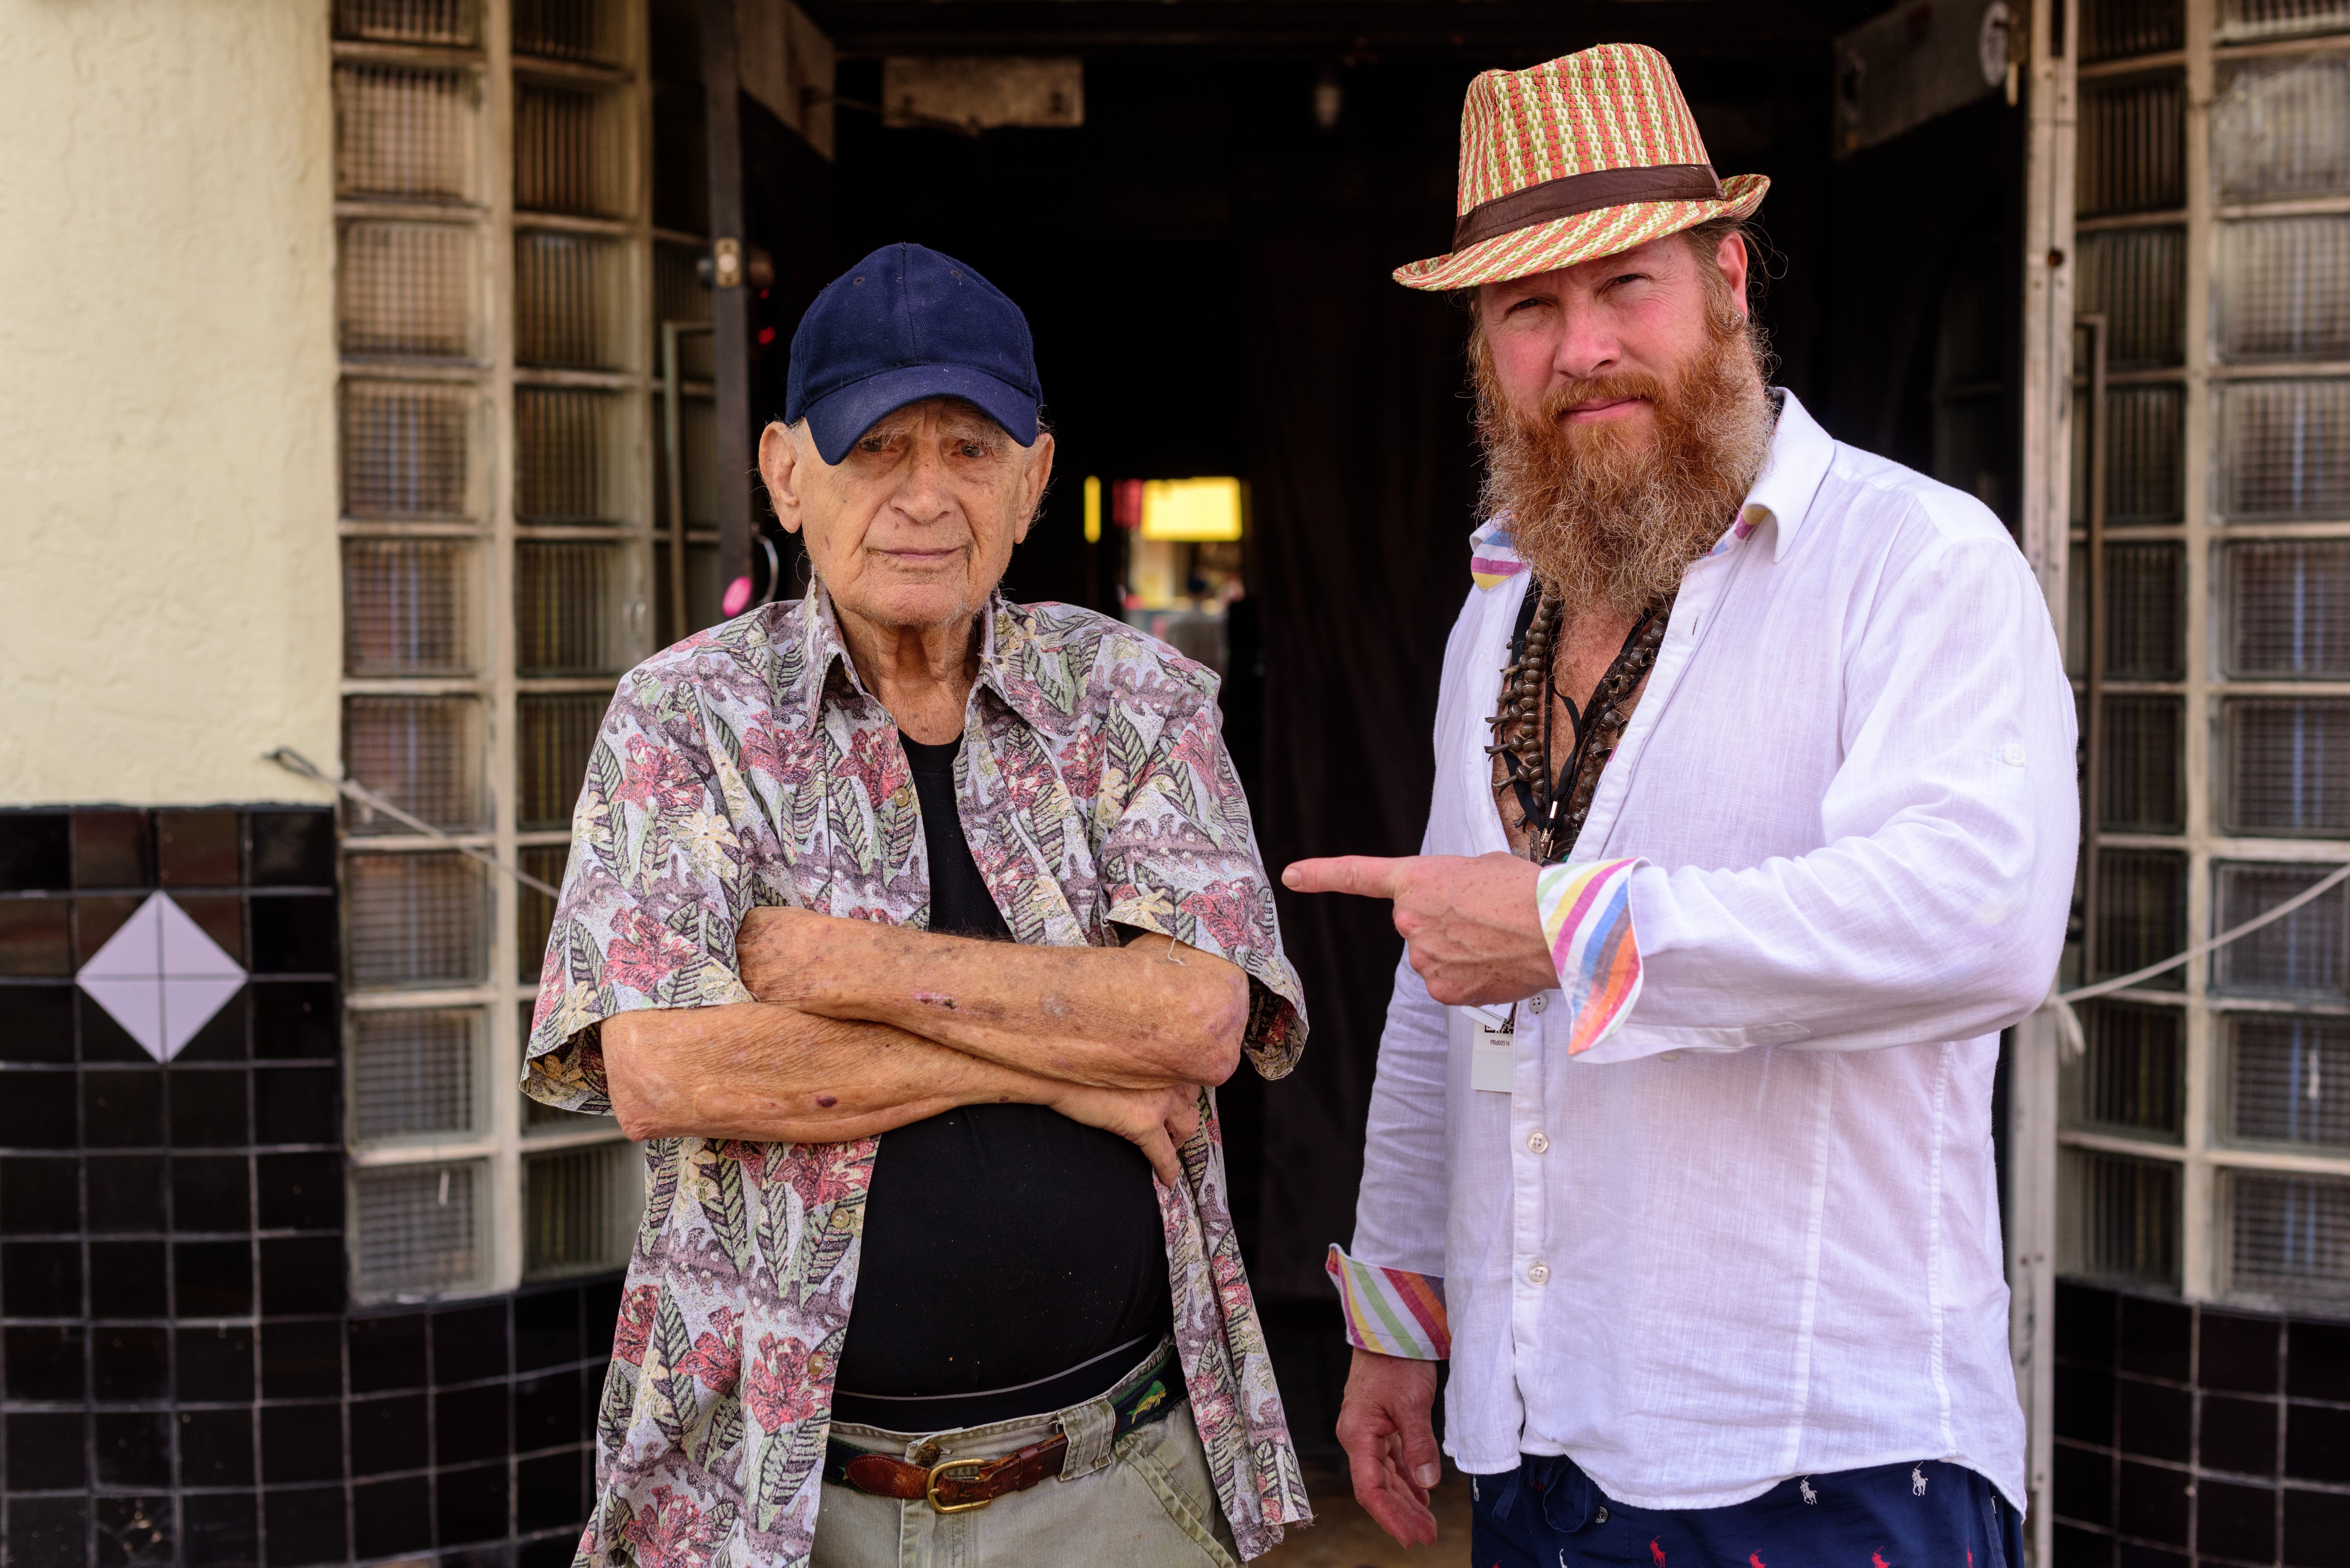 Gregory de la Haba and the 101-year-old owner Mac at Club Deuce